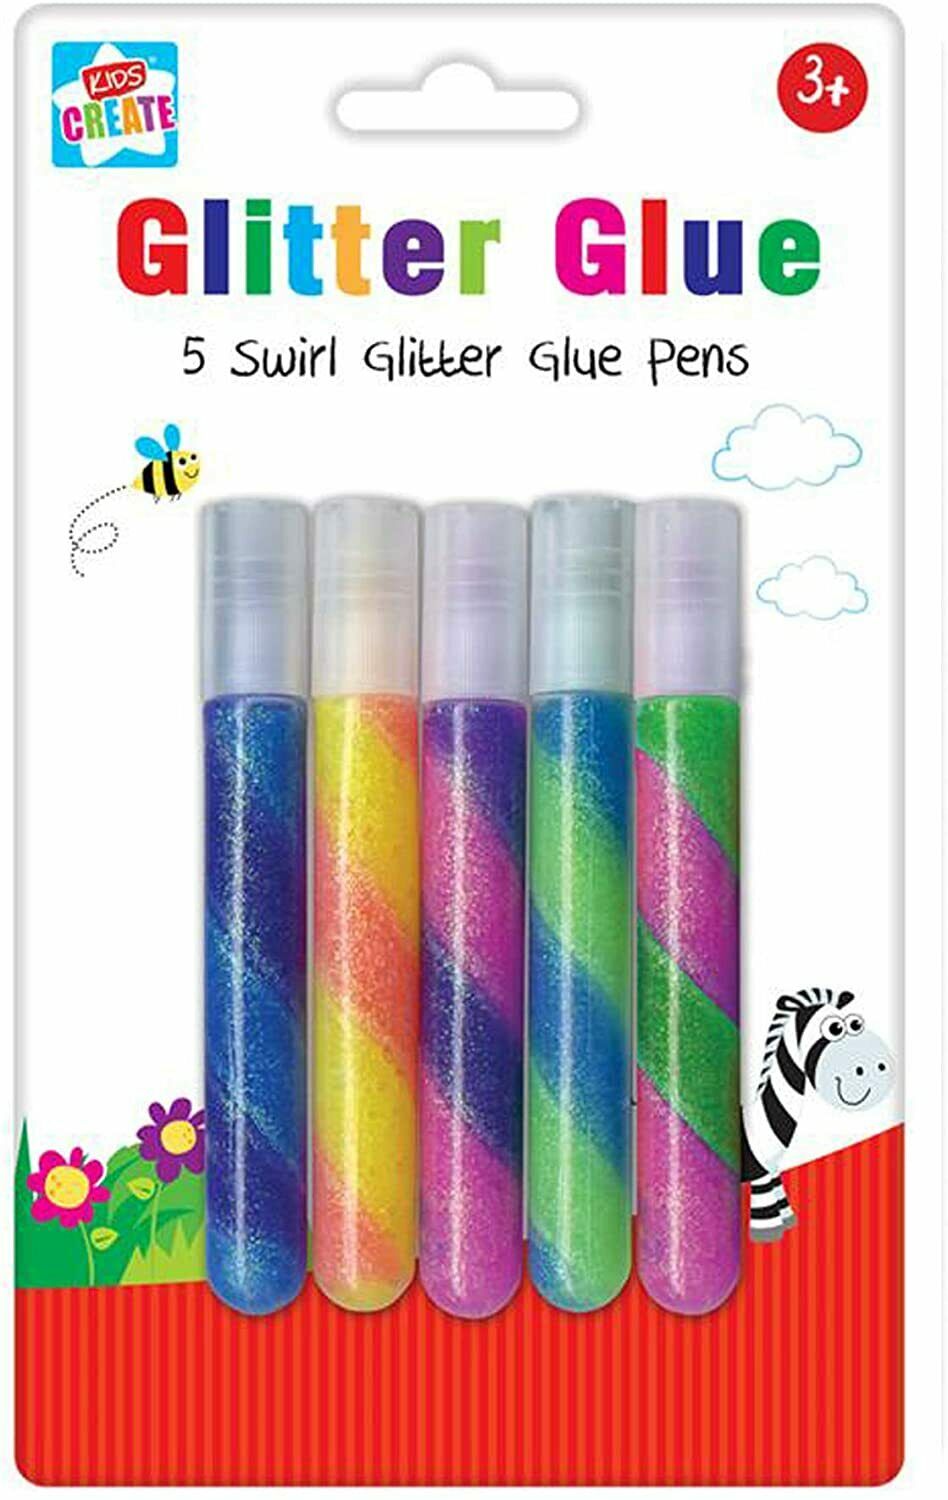 Glitter glue 5 pack The Bubble Room Art and Craft Store Dublin